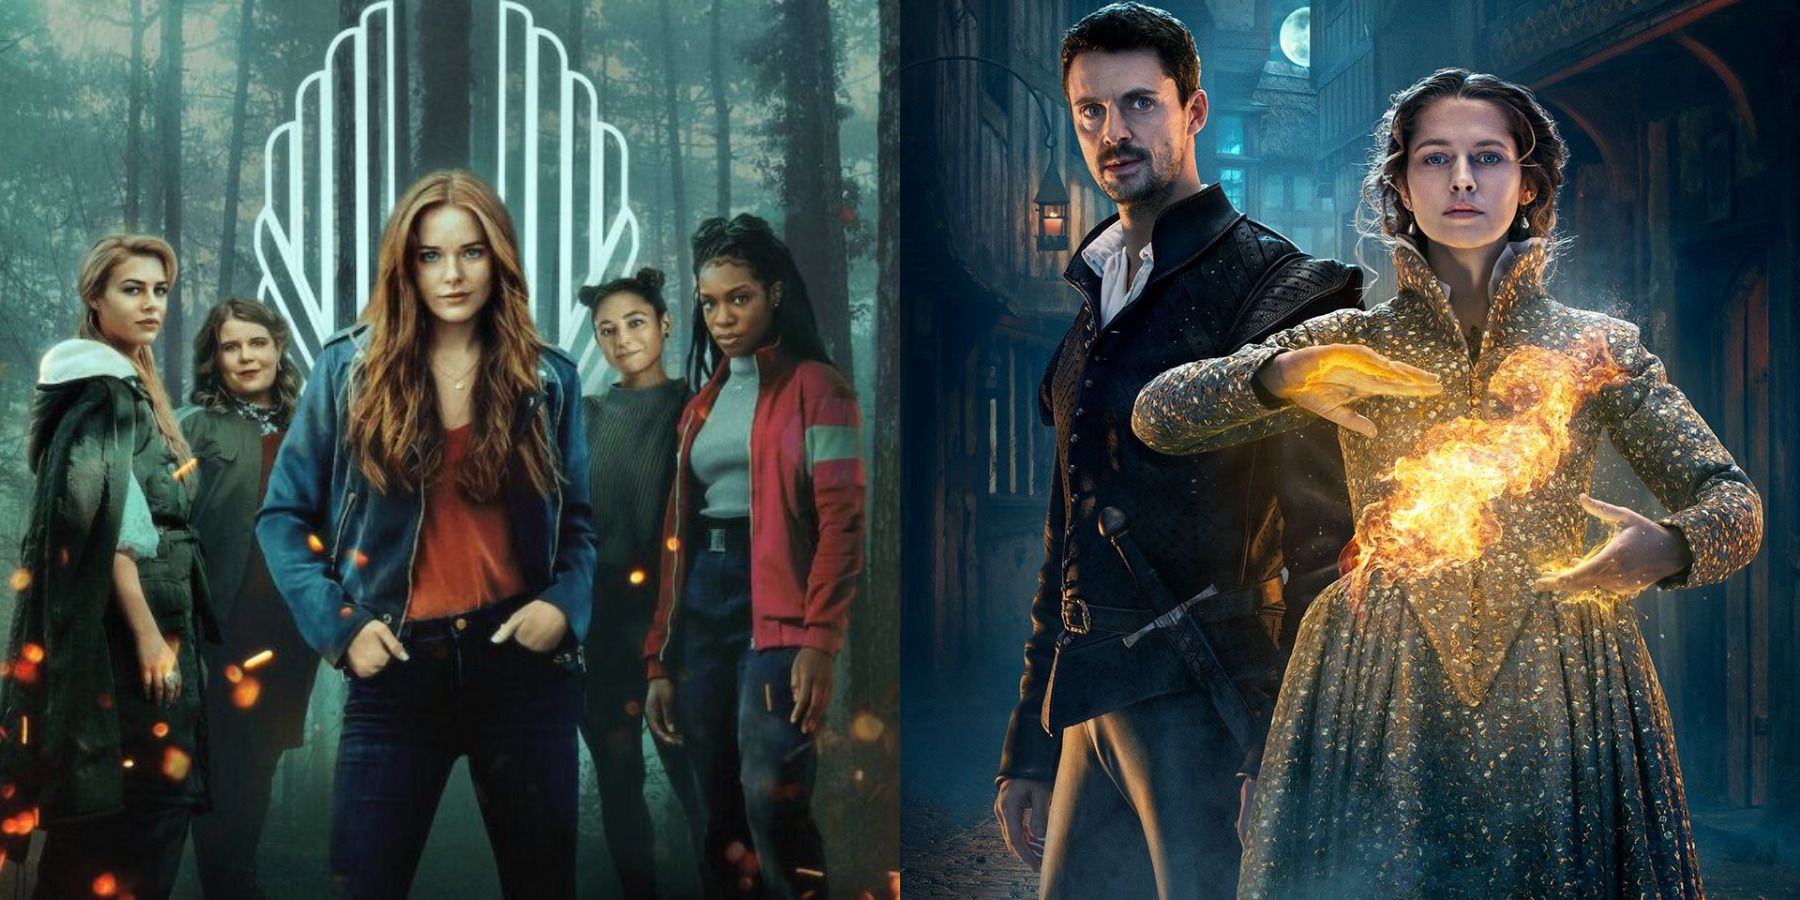 Fantasy shows feature split image Fate: The Winx Saga and A Discovery of Witches